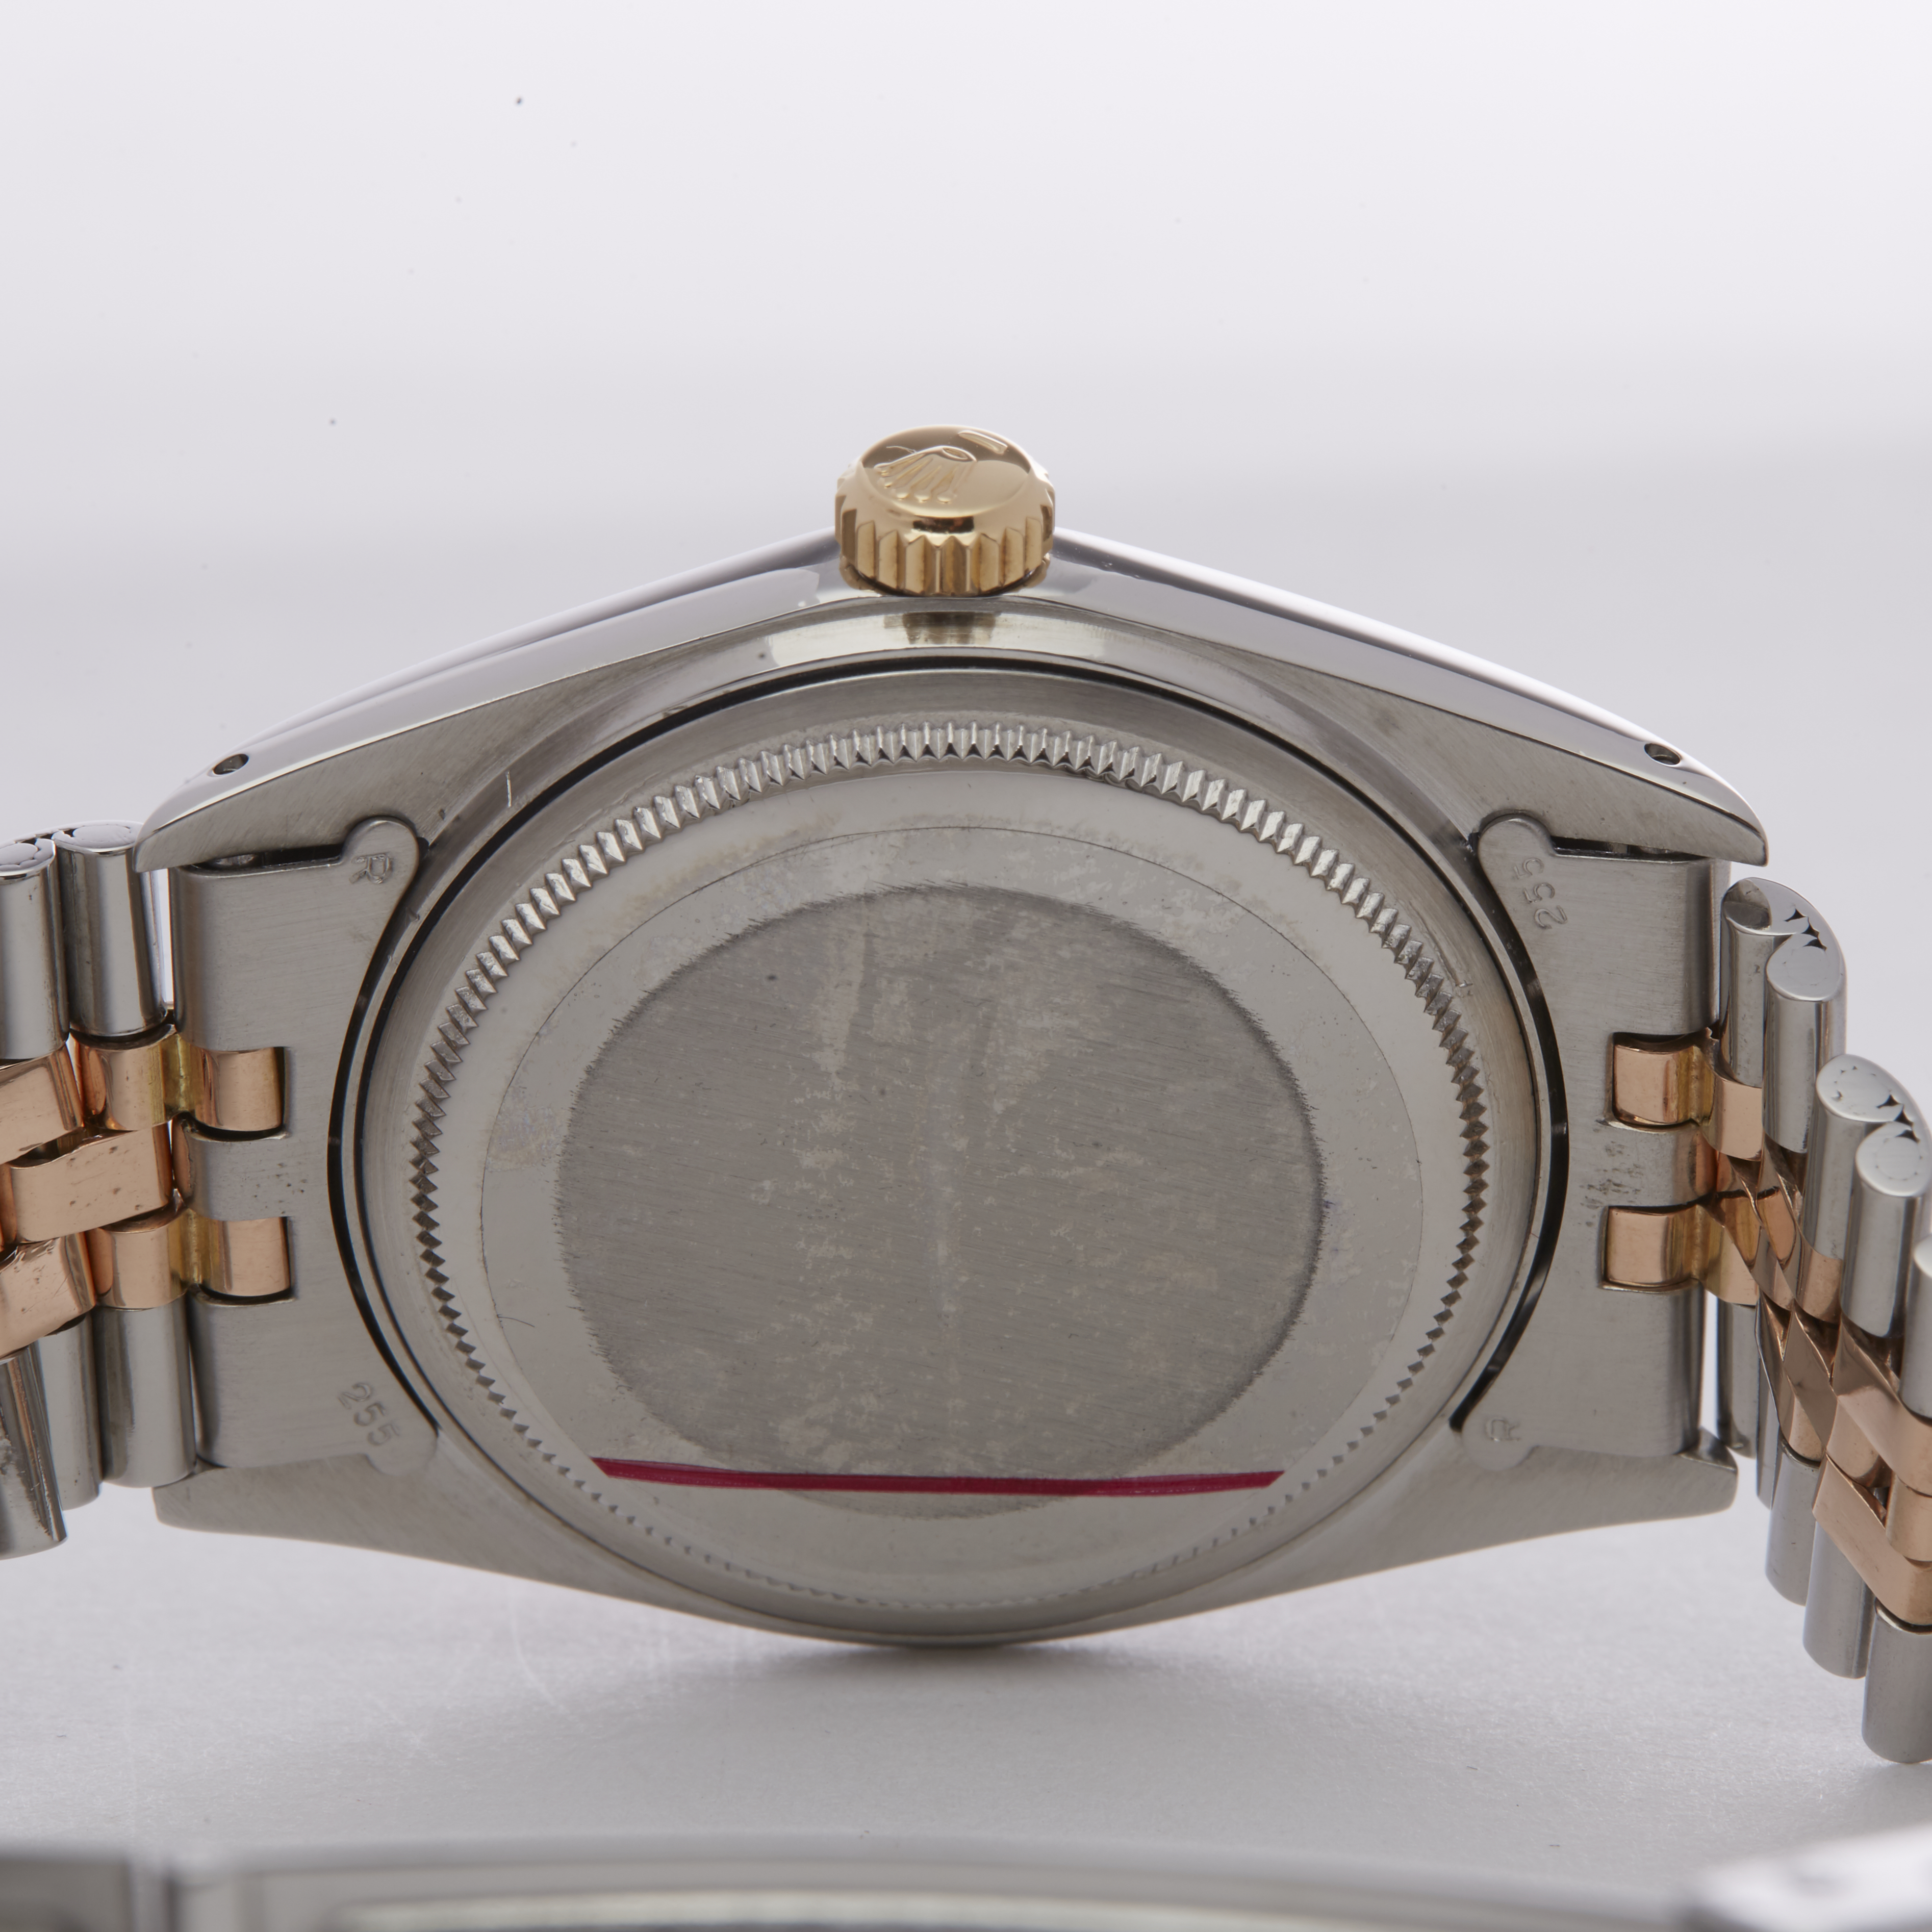 Rolex Datejust 36 1601 Men Rose Gold & Stainless Steel Watch - Image 2 of 6